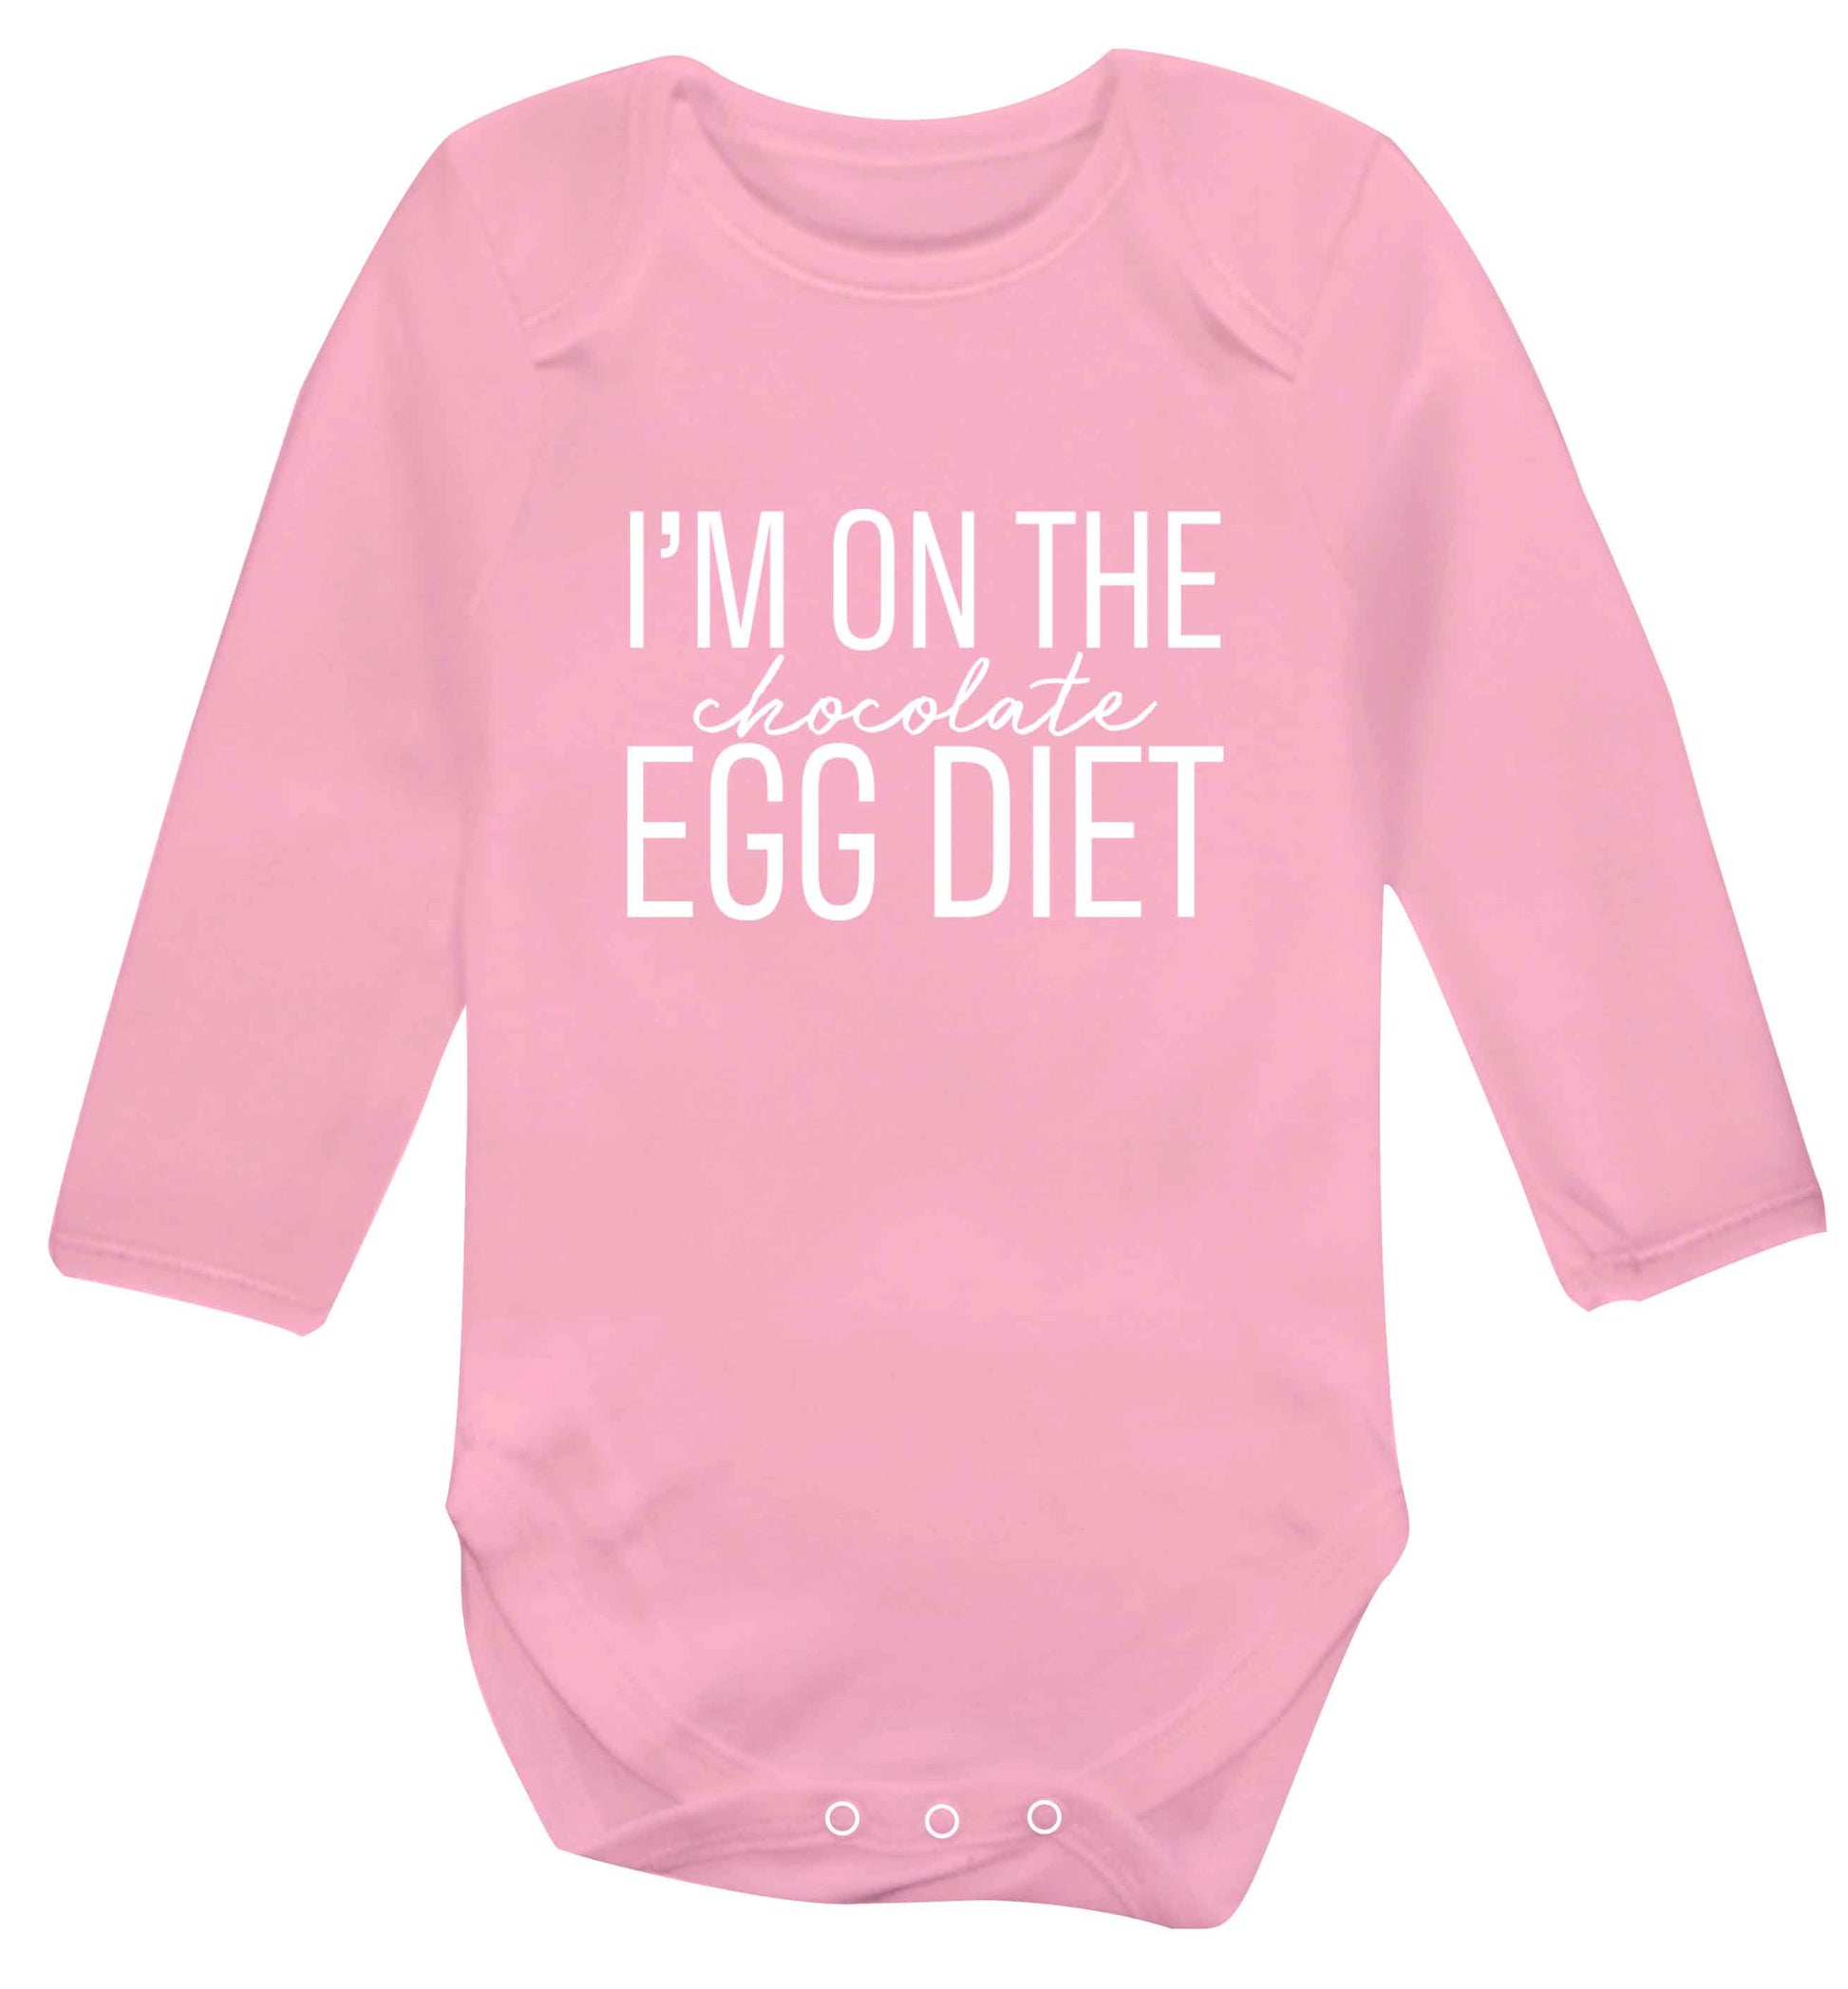 I'm on the chocolate egg diet baby vest long sleeved pale pink 6-12 months